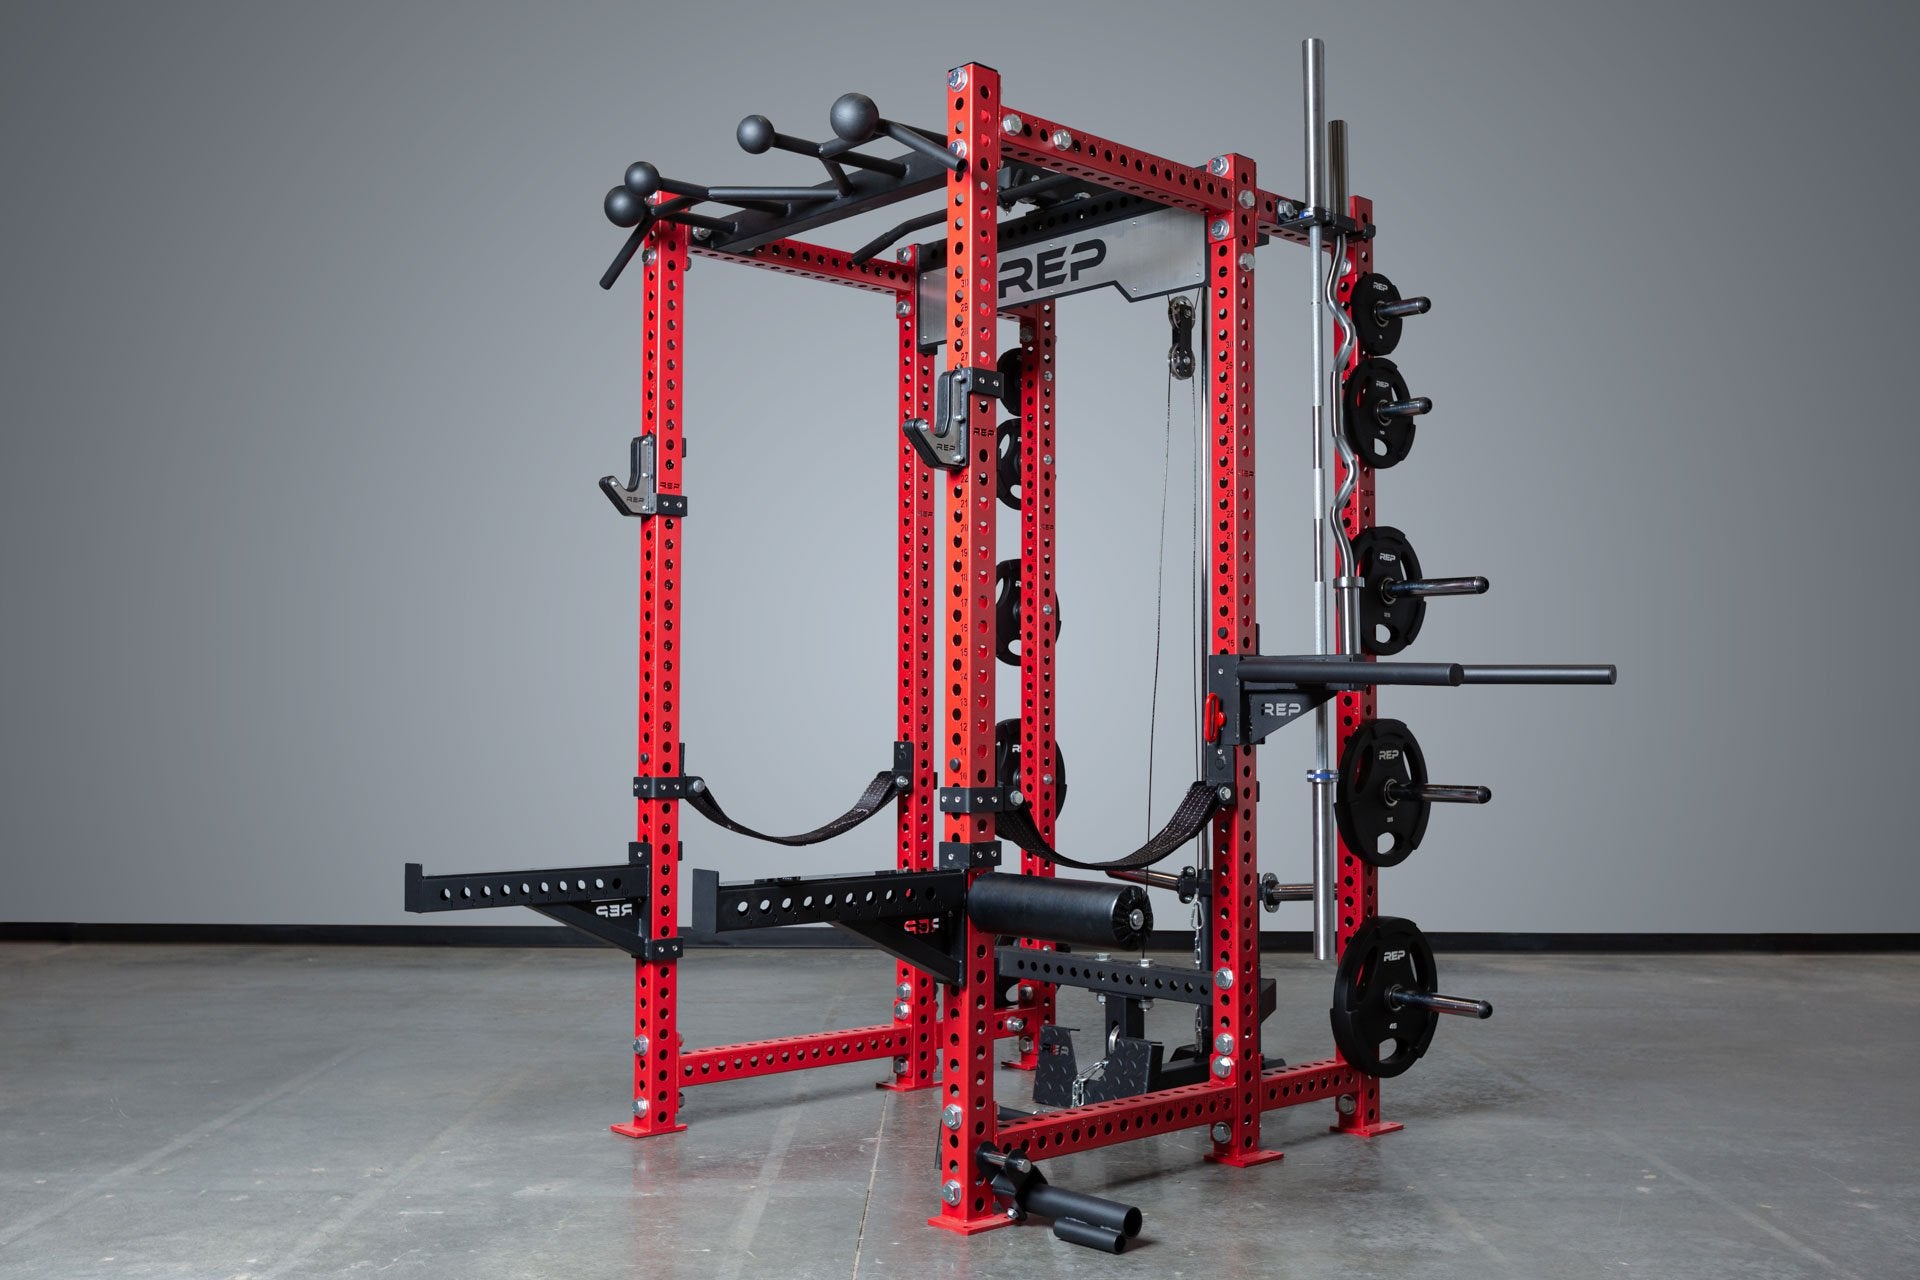 Daul Barbell Hanger Shown on a 6-Post PR-5000 Power Rack on Optional Weight Storage Crossmember